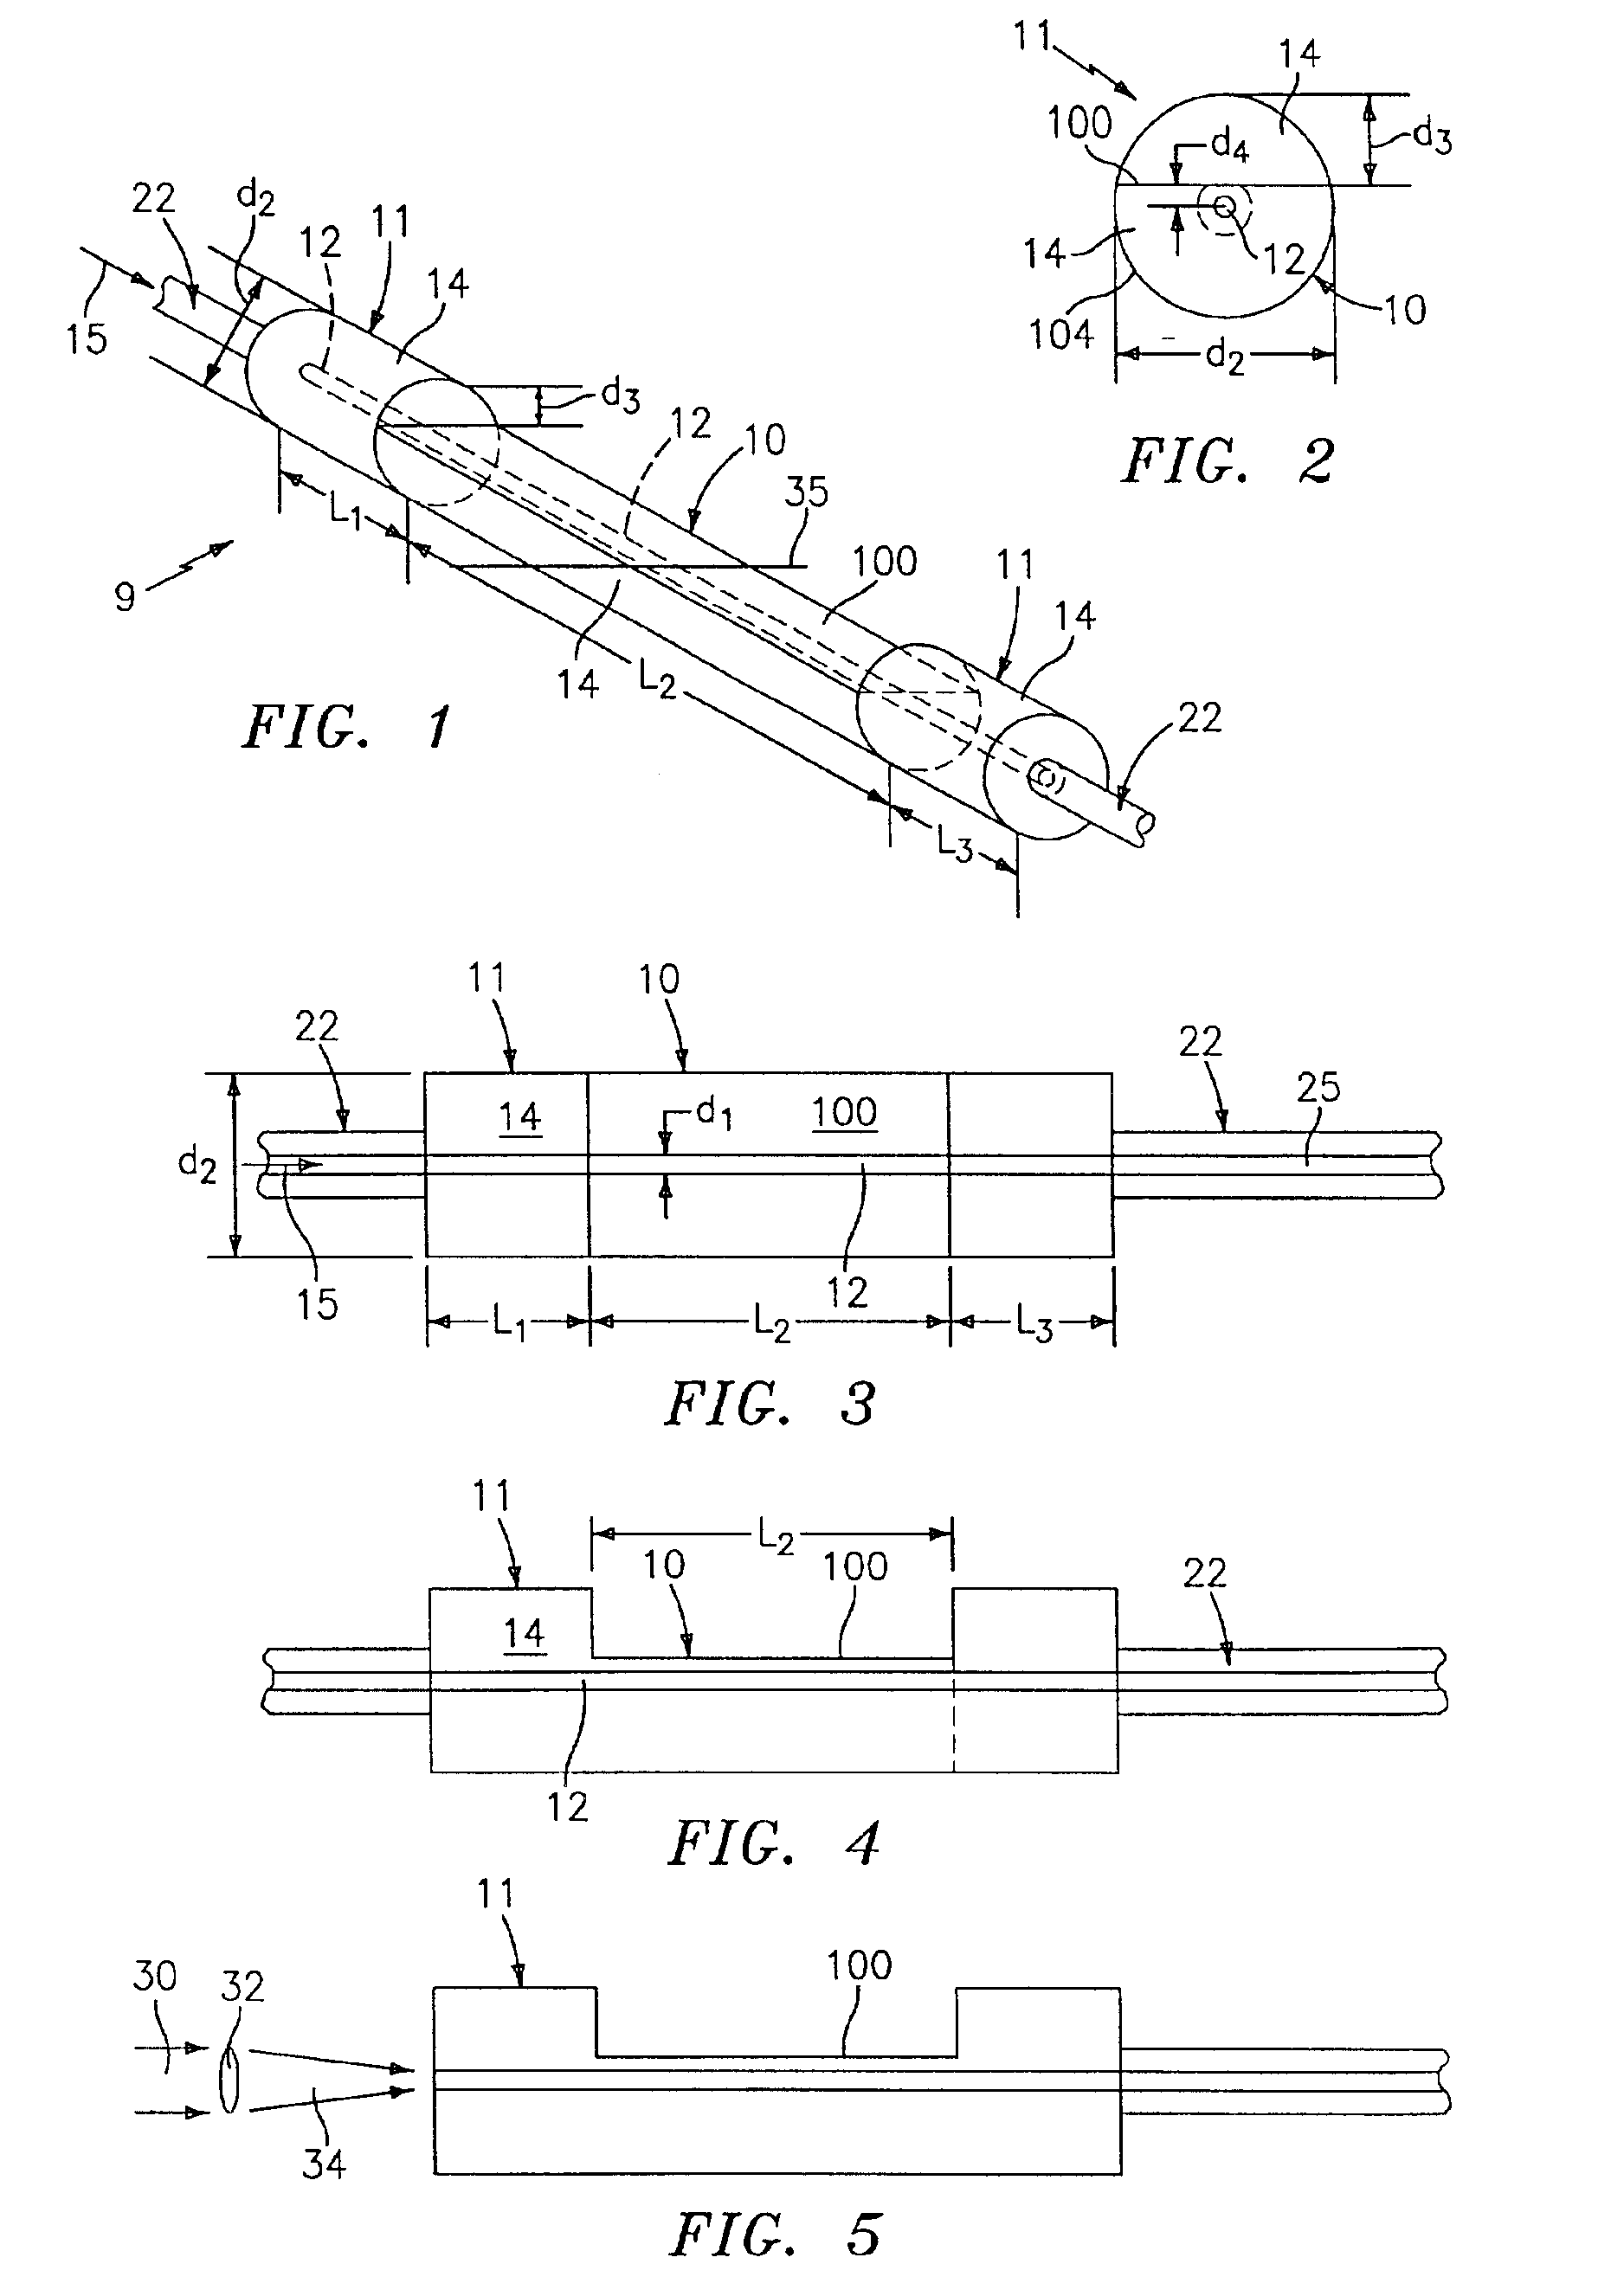 Large diameter D-shaped optical waveguide and coupler